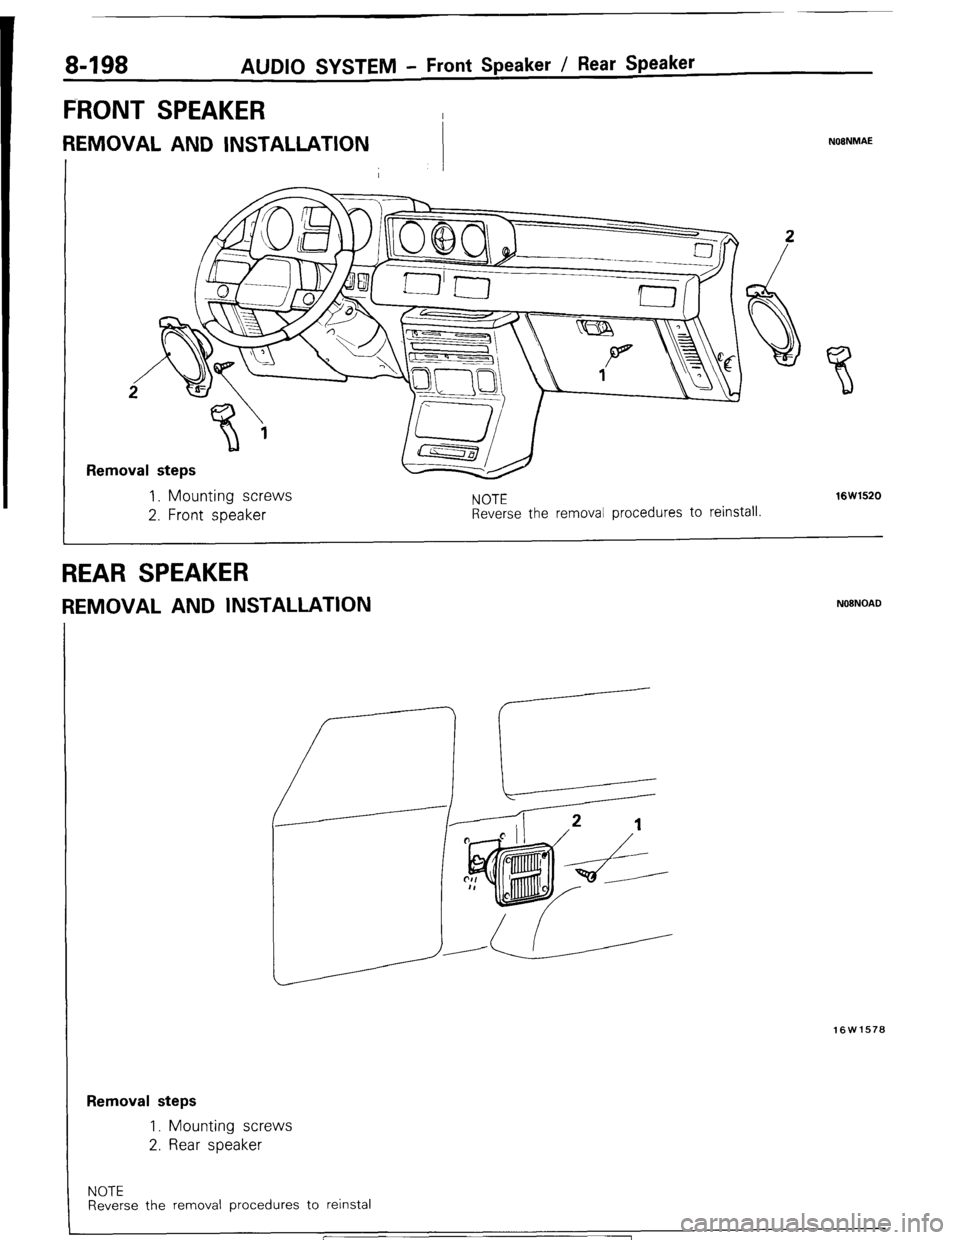 MITSUBISHI MONTERO 1987 1.G Workshop Manual 8-198 AUDIO SYSTEM - Front Speaker / Rear Speaker 
FRONT SPEAKER 
REMOVAL AND INSTALLATION NOONMAE 
Removal steps 
1. Mounting screws 
2. Front speaker 
NOTE 
Reverse the removal procedures to reinsta